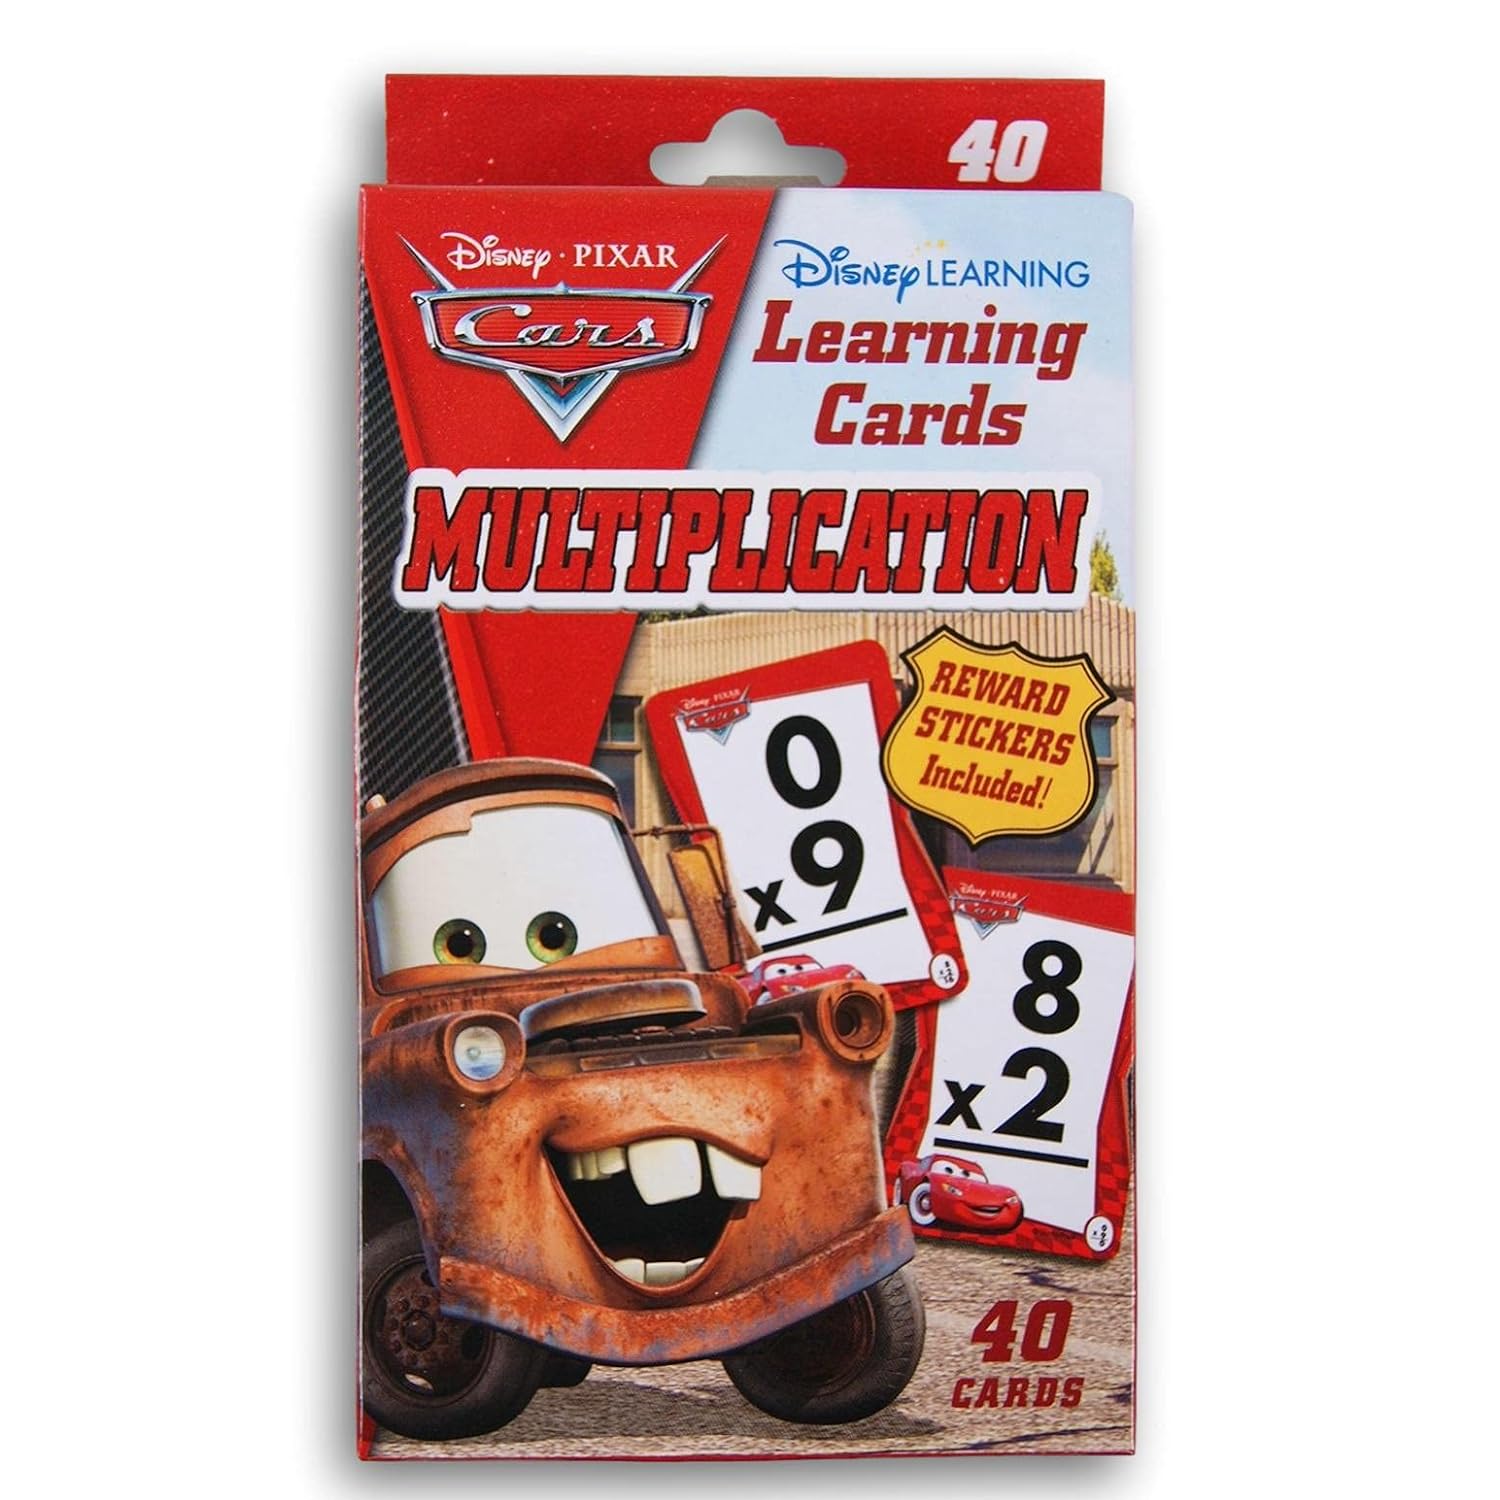 Great Choice Products Cars Jumbo Multiplication Flash Cards With Reward Stickers - Kids Math Drill Learning -2Nd Grade-3Rd Grade- 40 Cards,